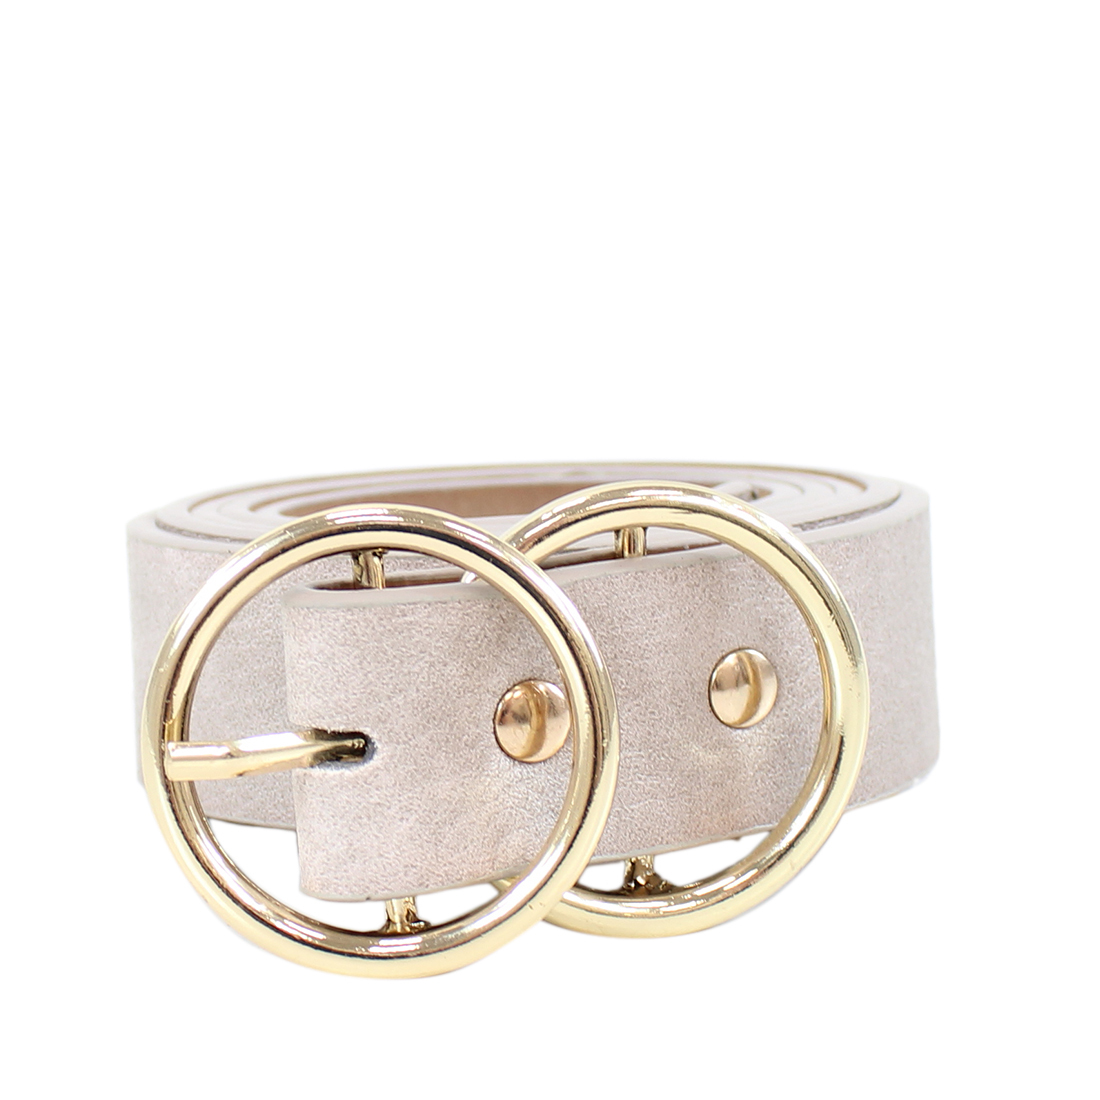 * Two circle design buckle